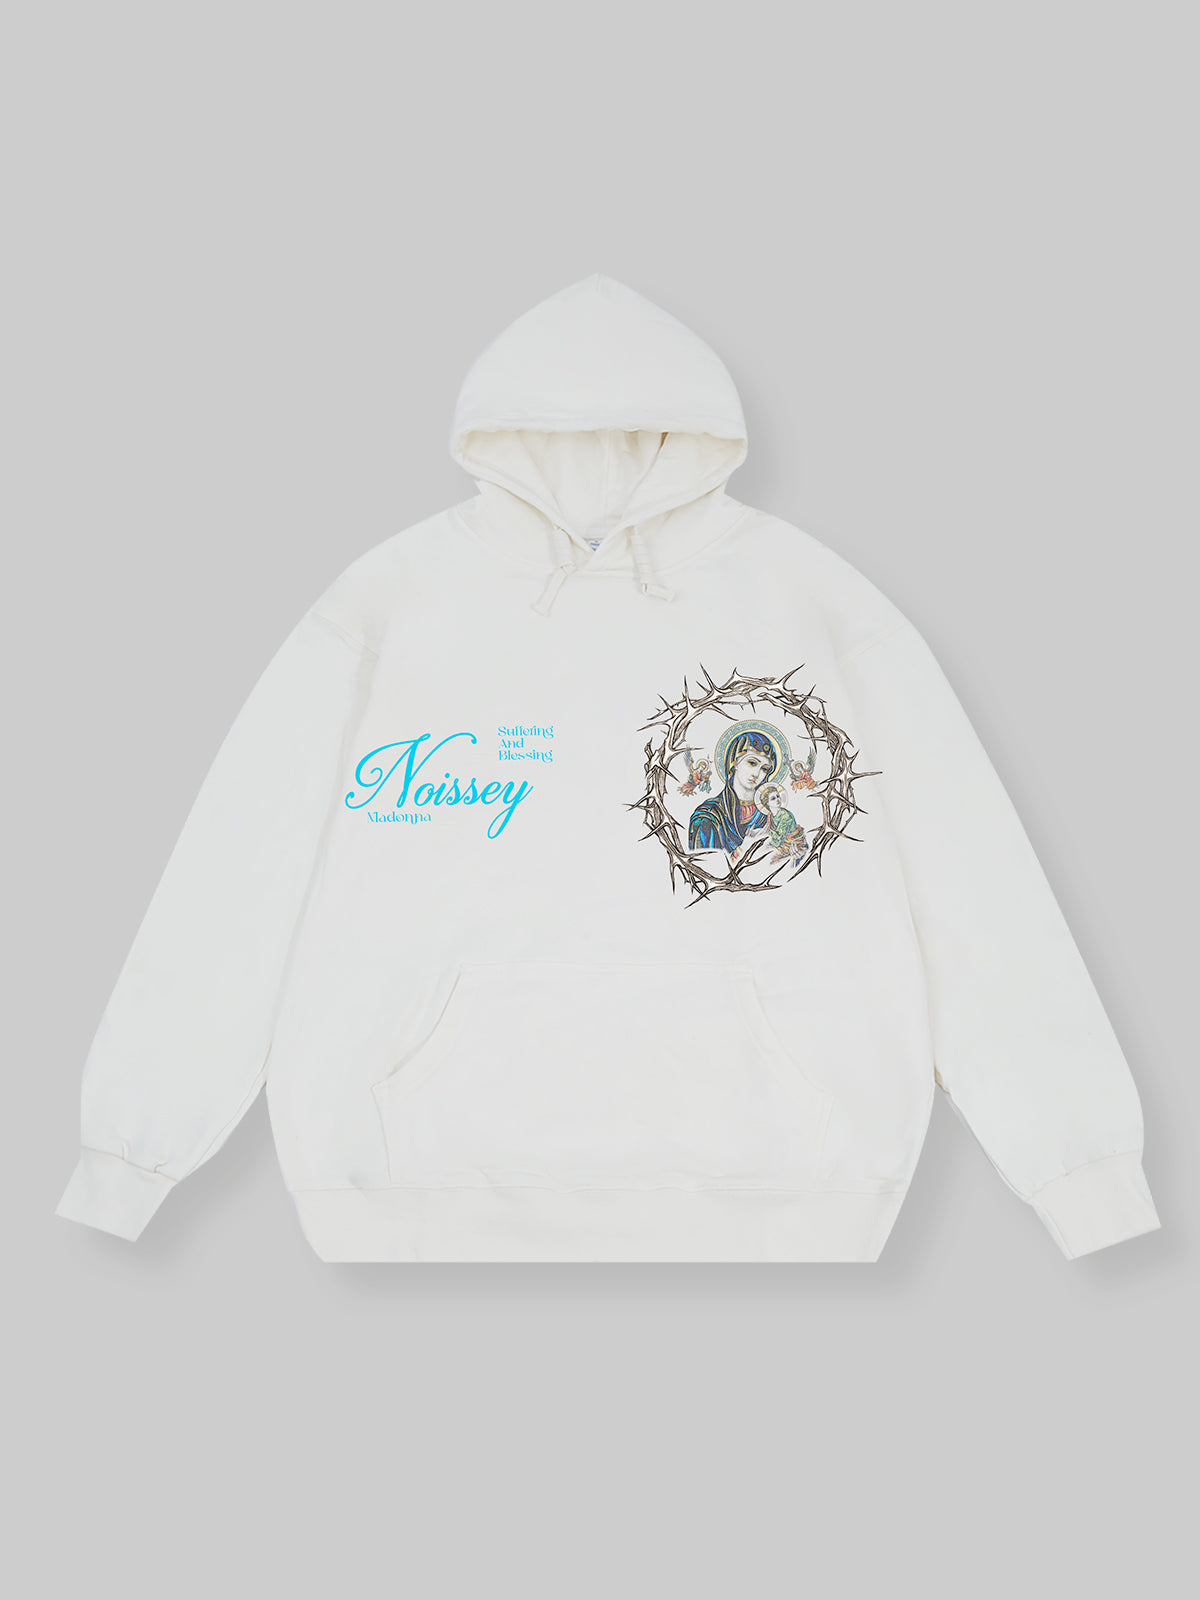 OBSTACLES & DANGERS© Noissey and Madonna and Child Hoodie